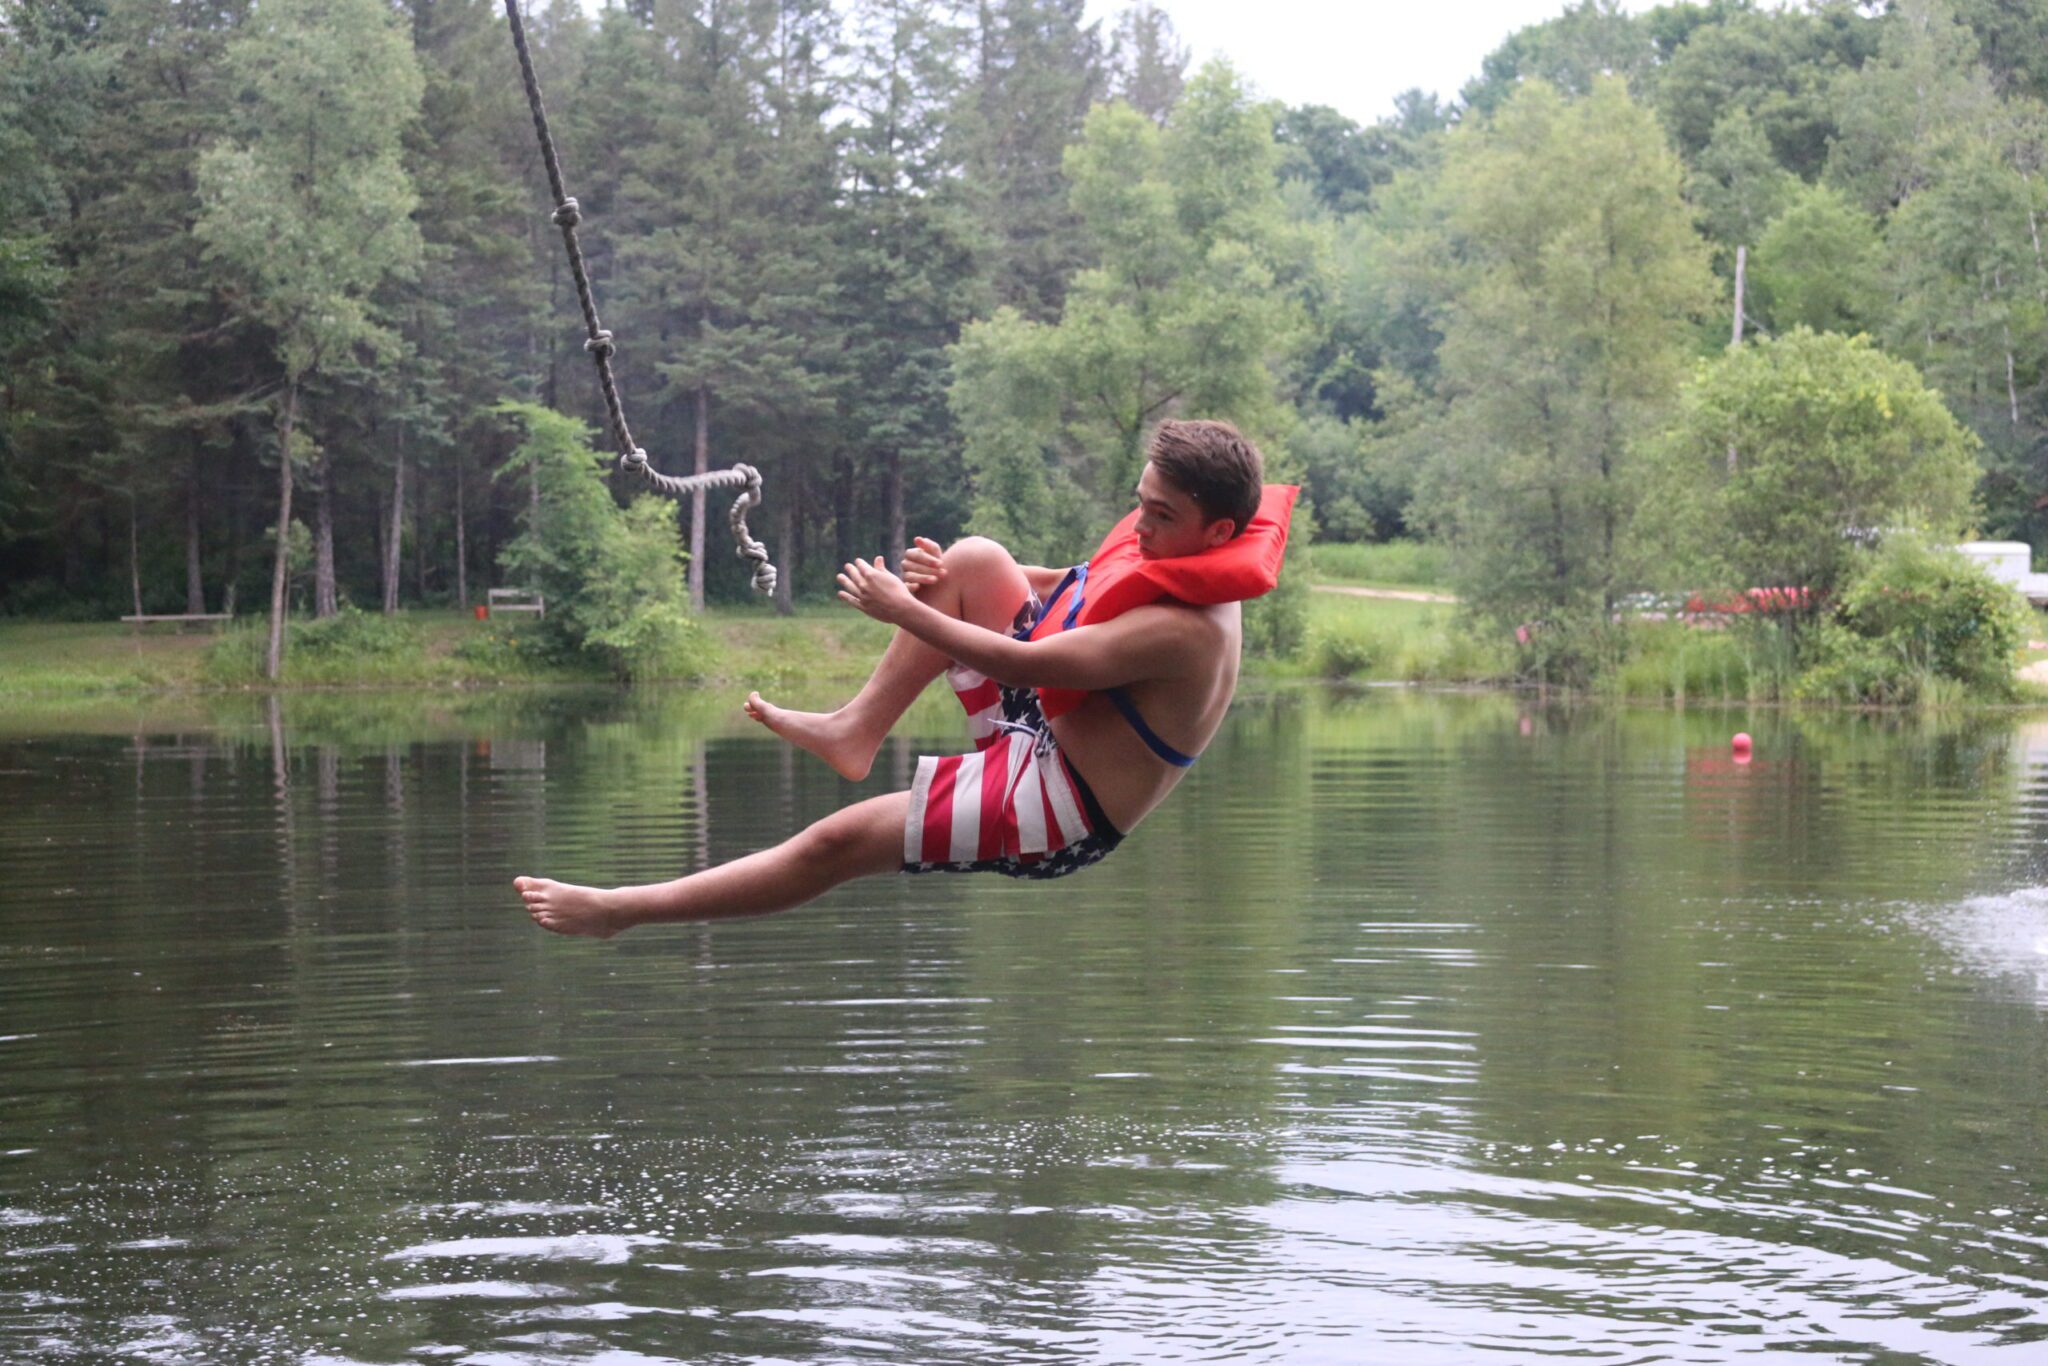 Boy camper jumping off of rope swing into lake